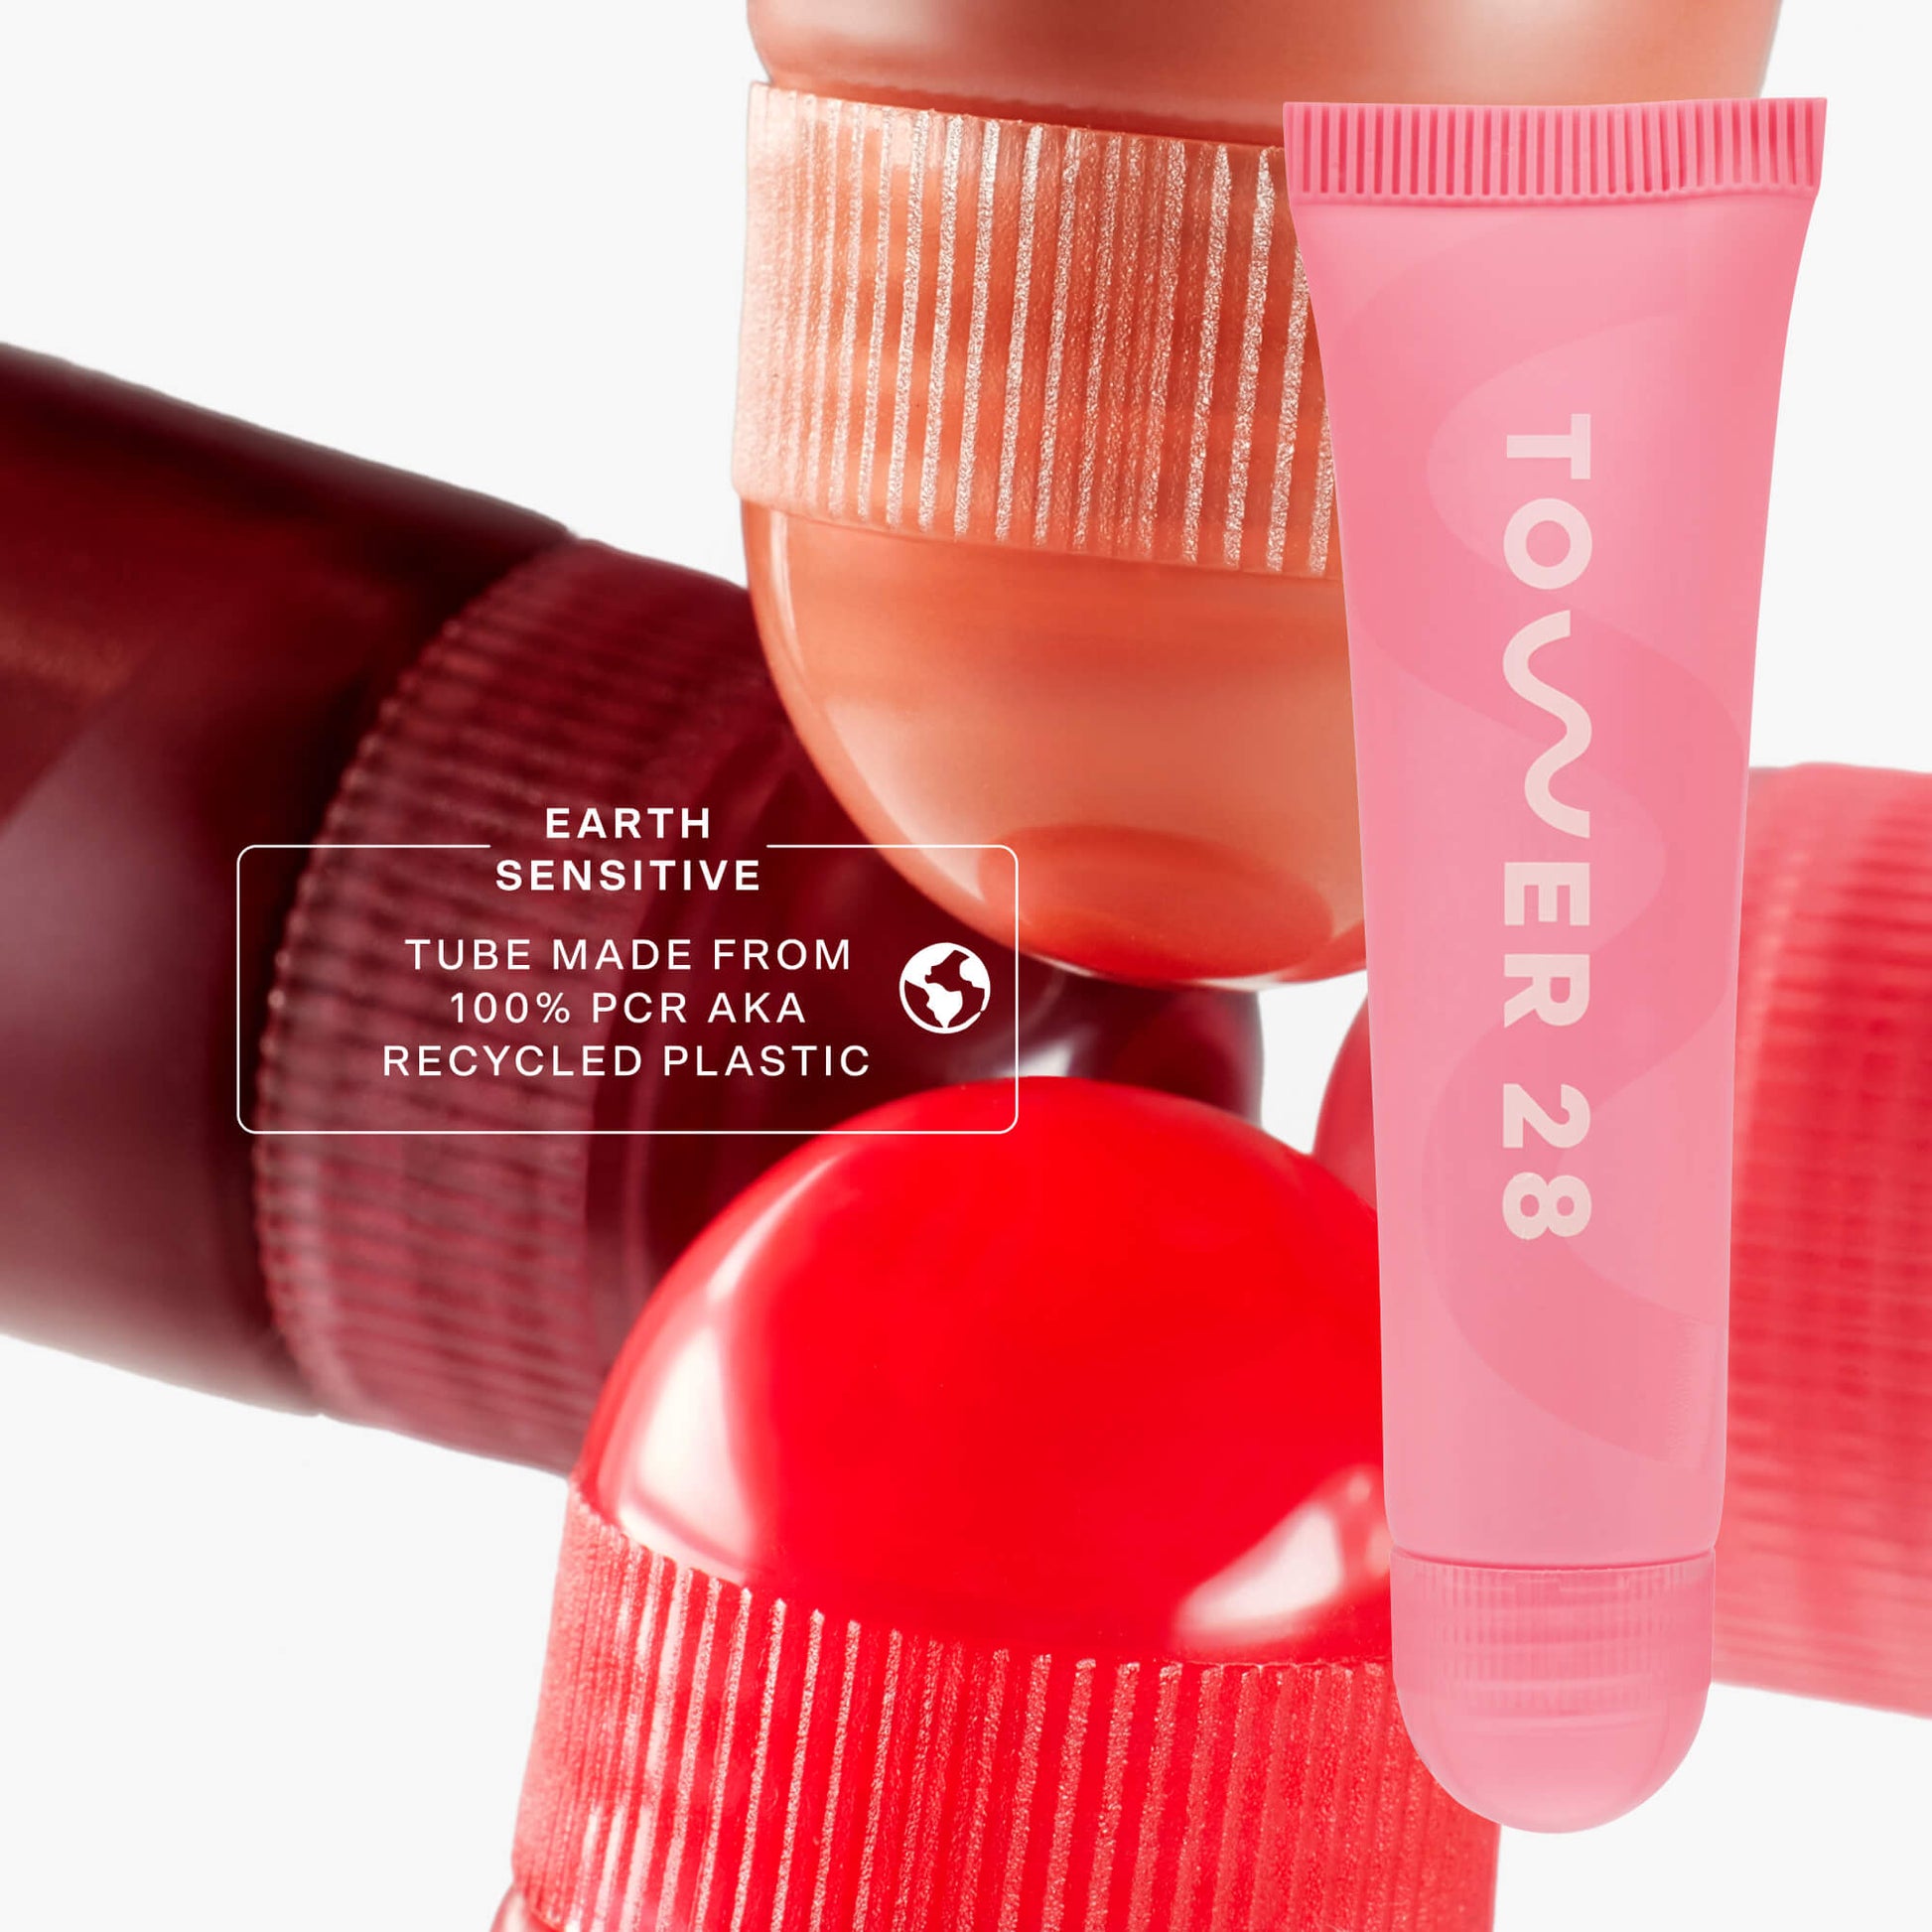 [Tower 28 Beauty LipSoftie™ Lip Treatment in Watermelon Kiwi has 100% recycled plastic packaging.